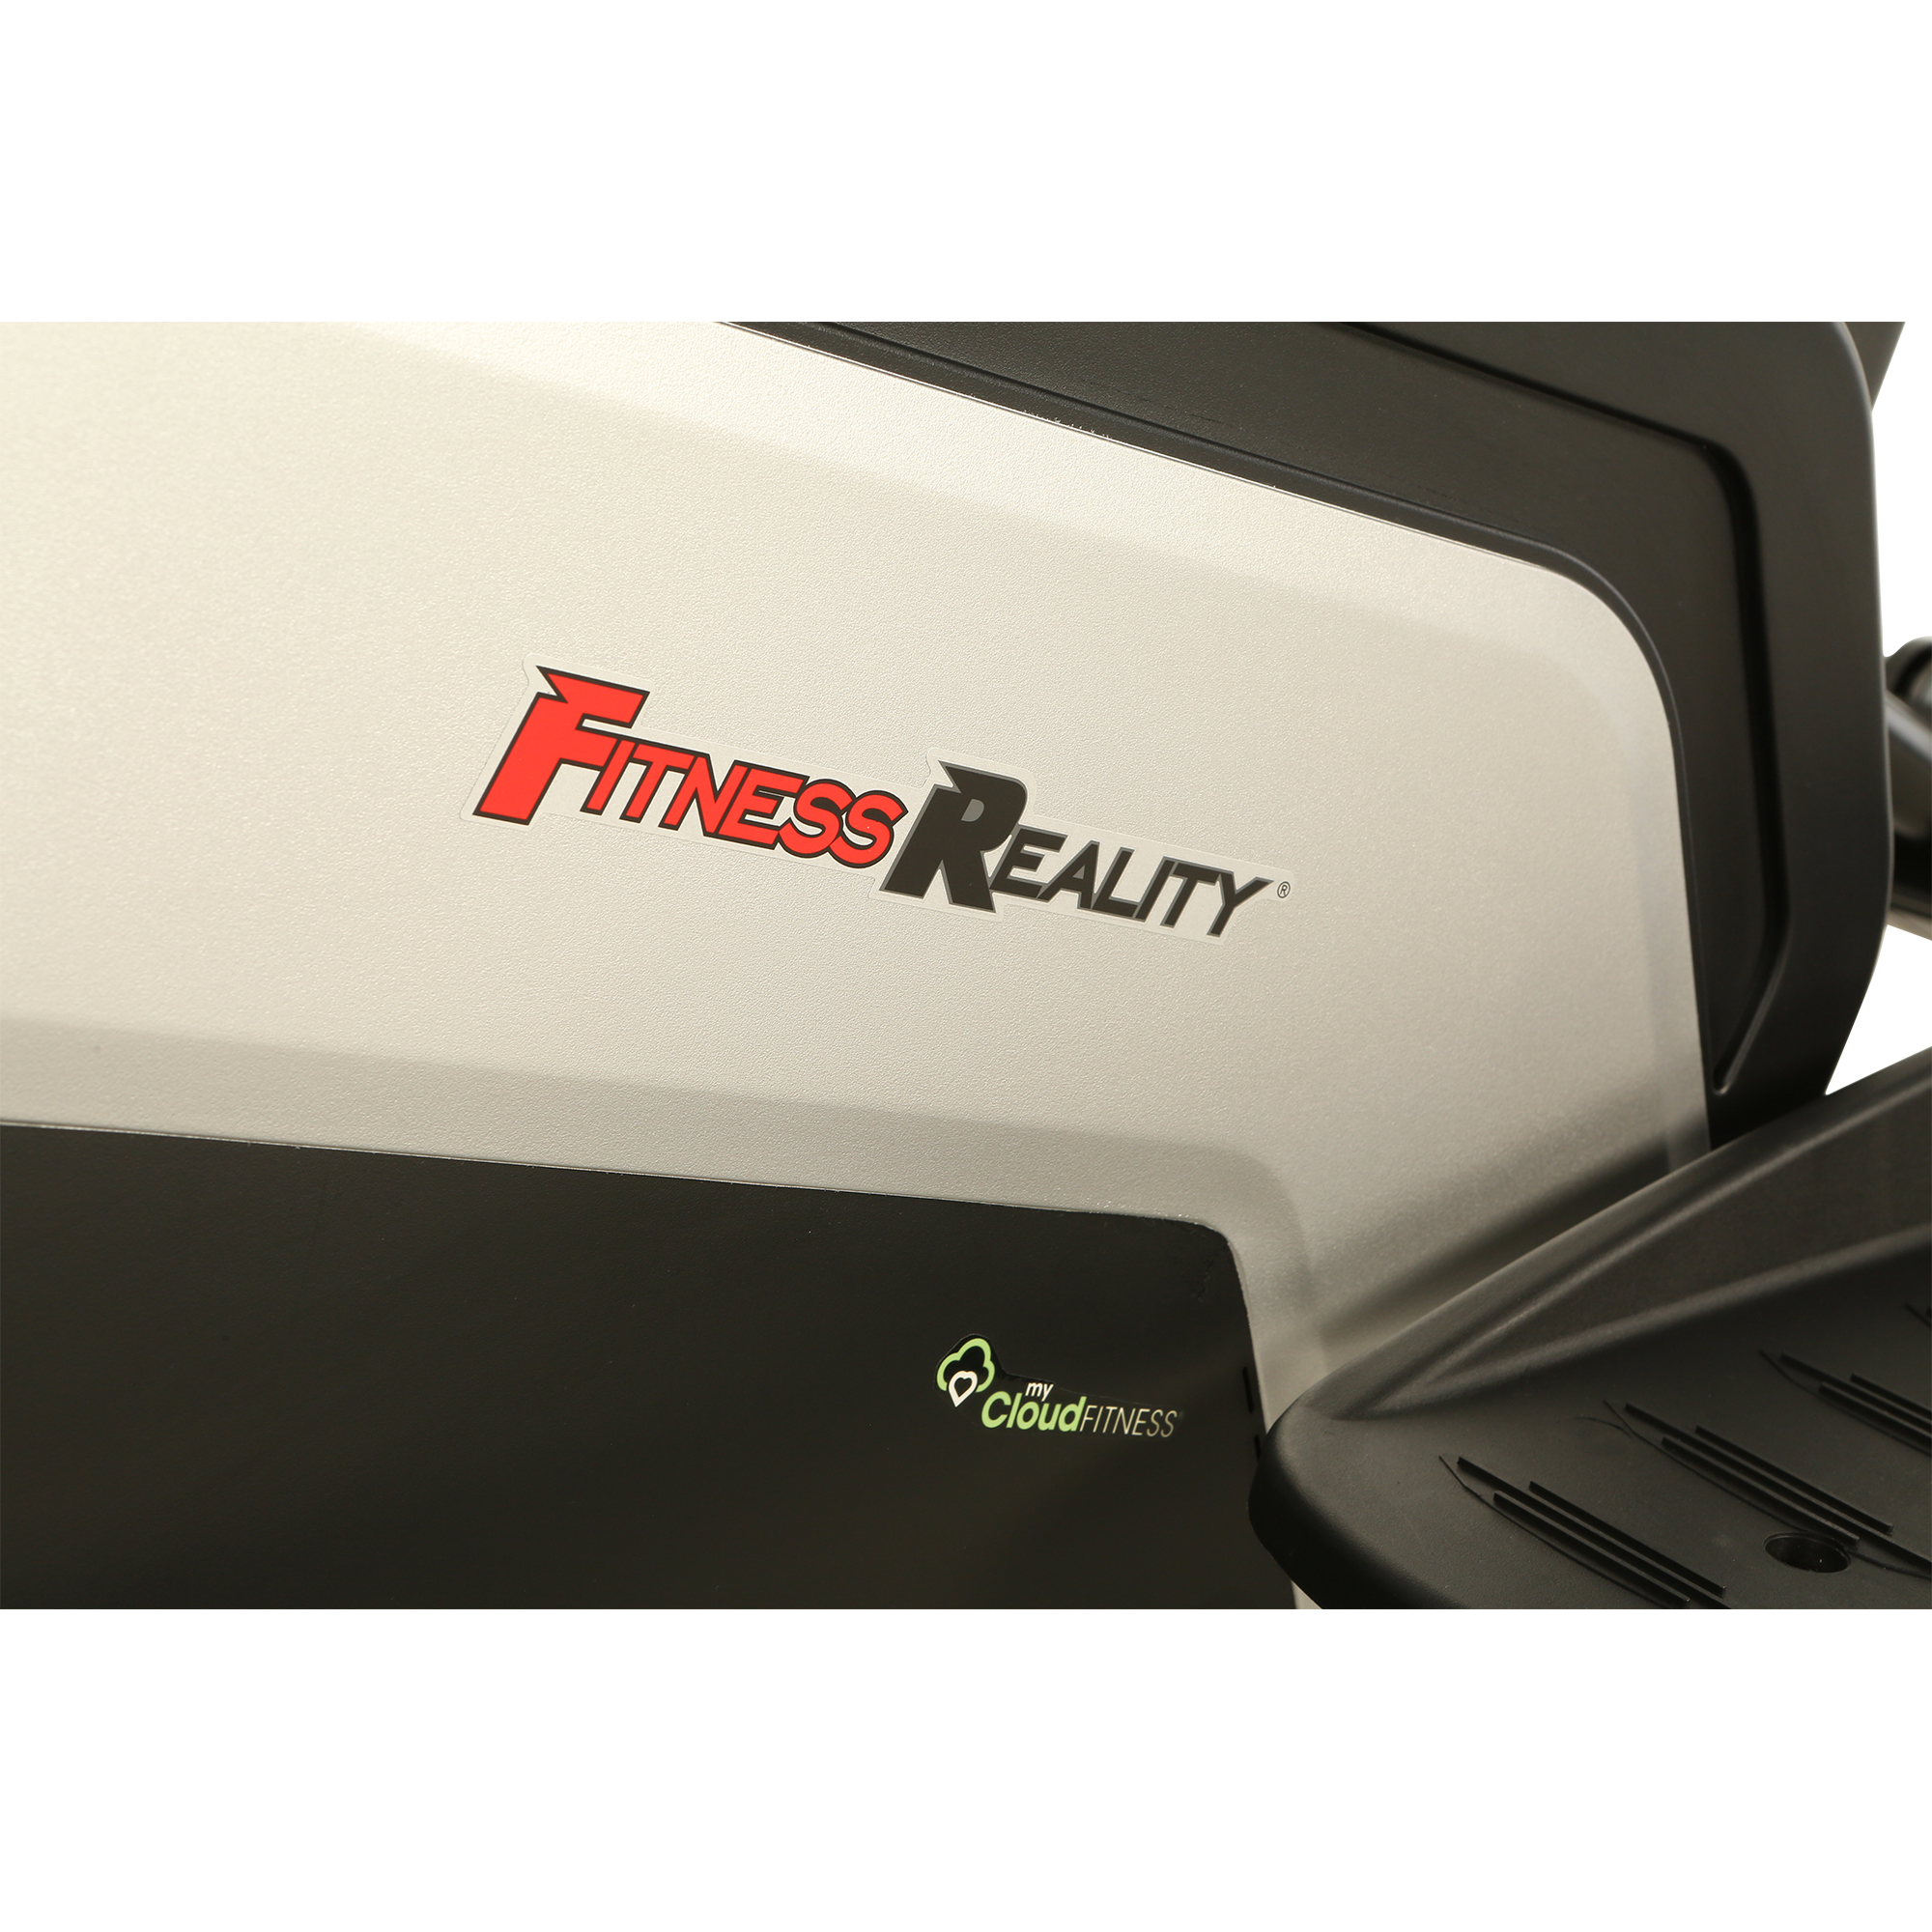 FITNESS REALITY Ei7500XL Bluetooth Magnetic Elliptical Trainer, 18” Stride, Goal Setting and Free App - image 3 of 20